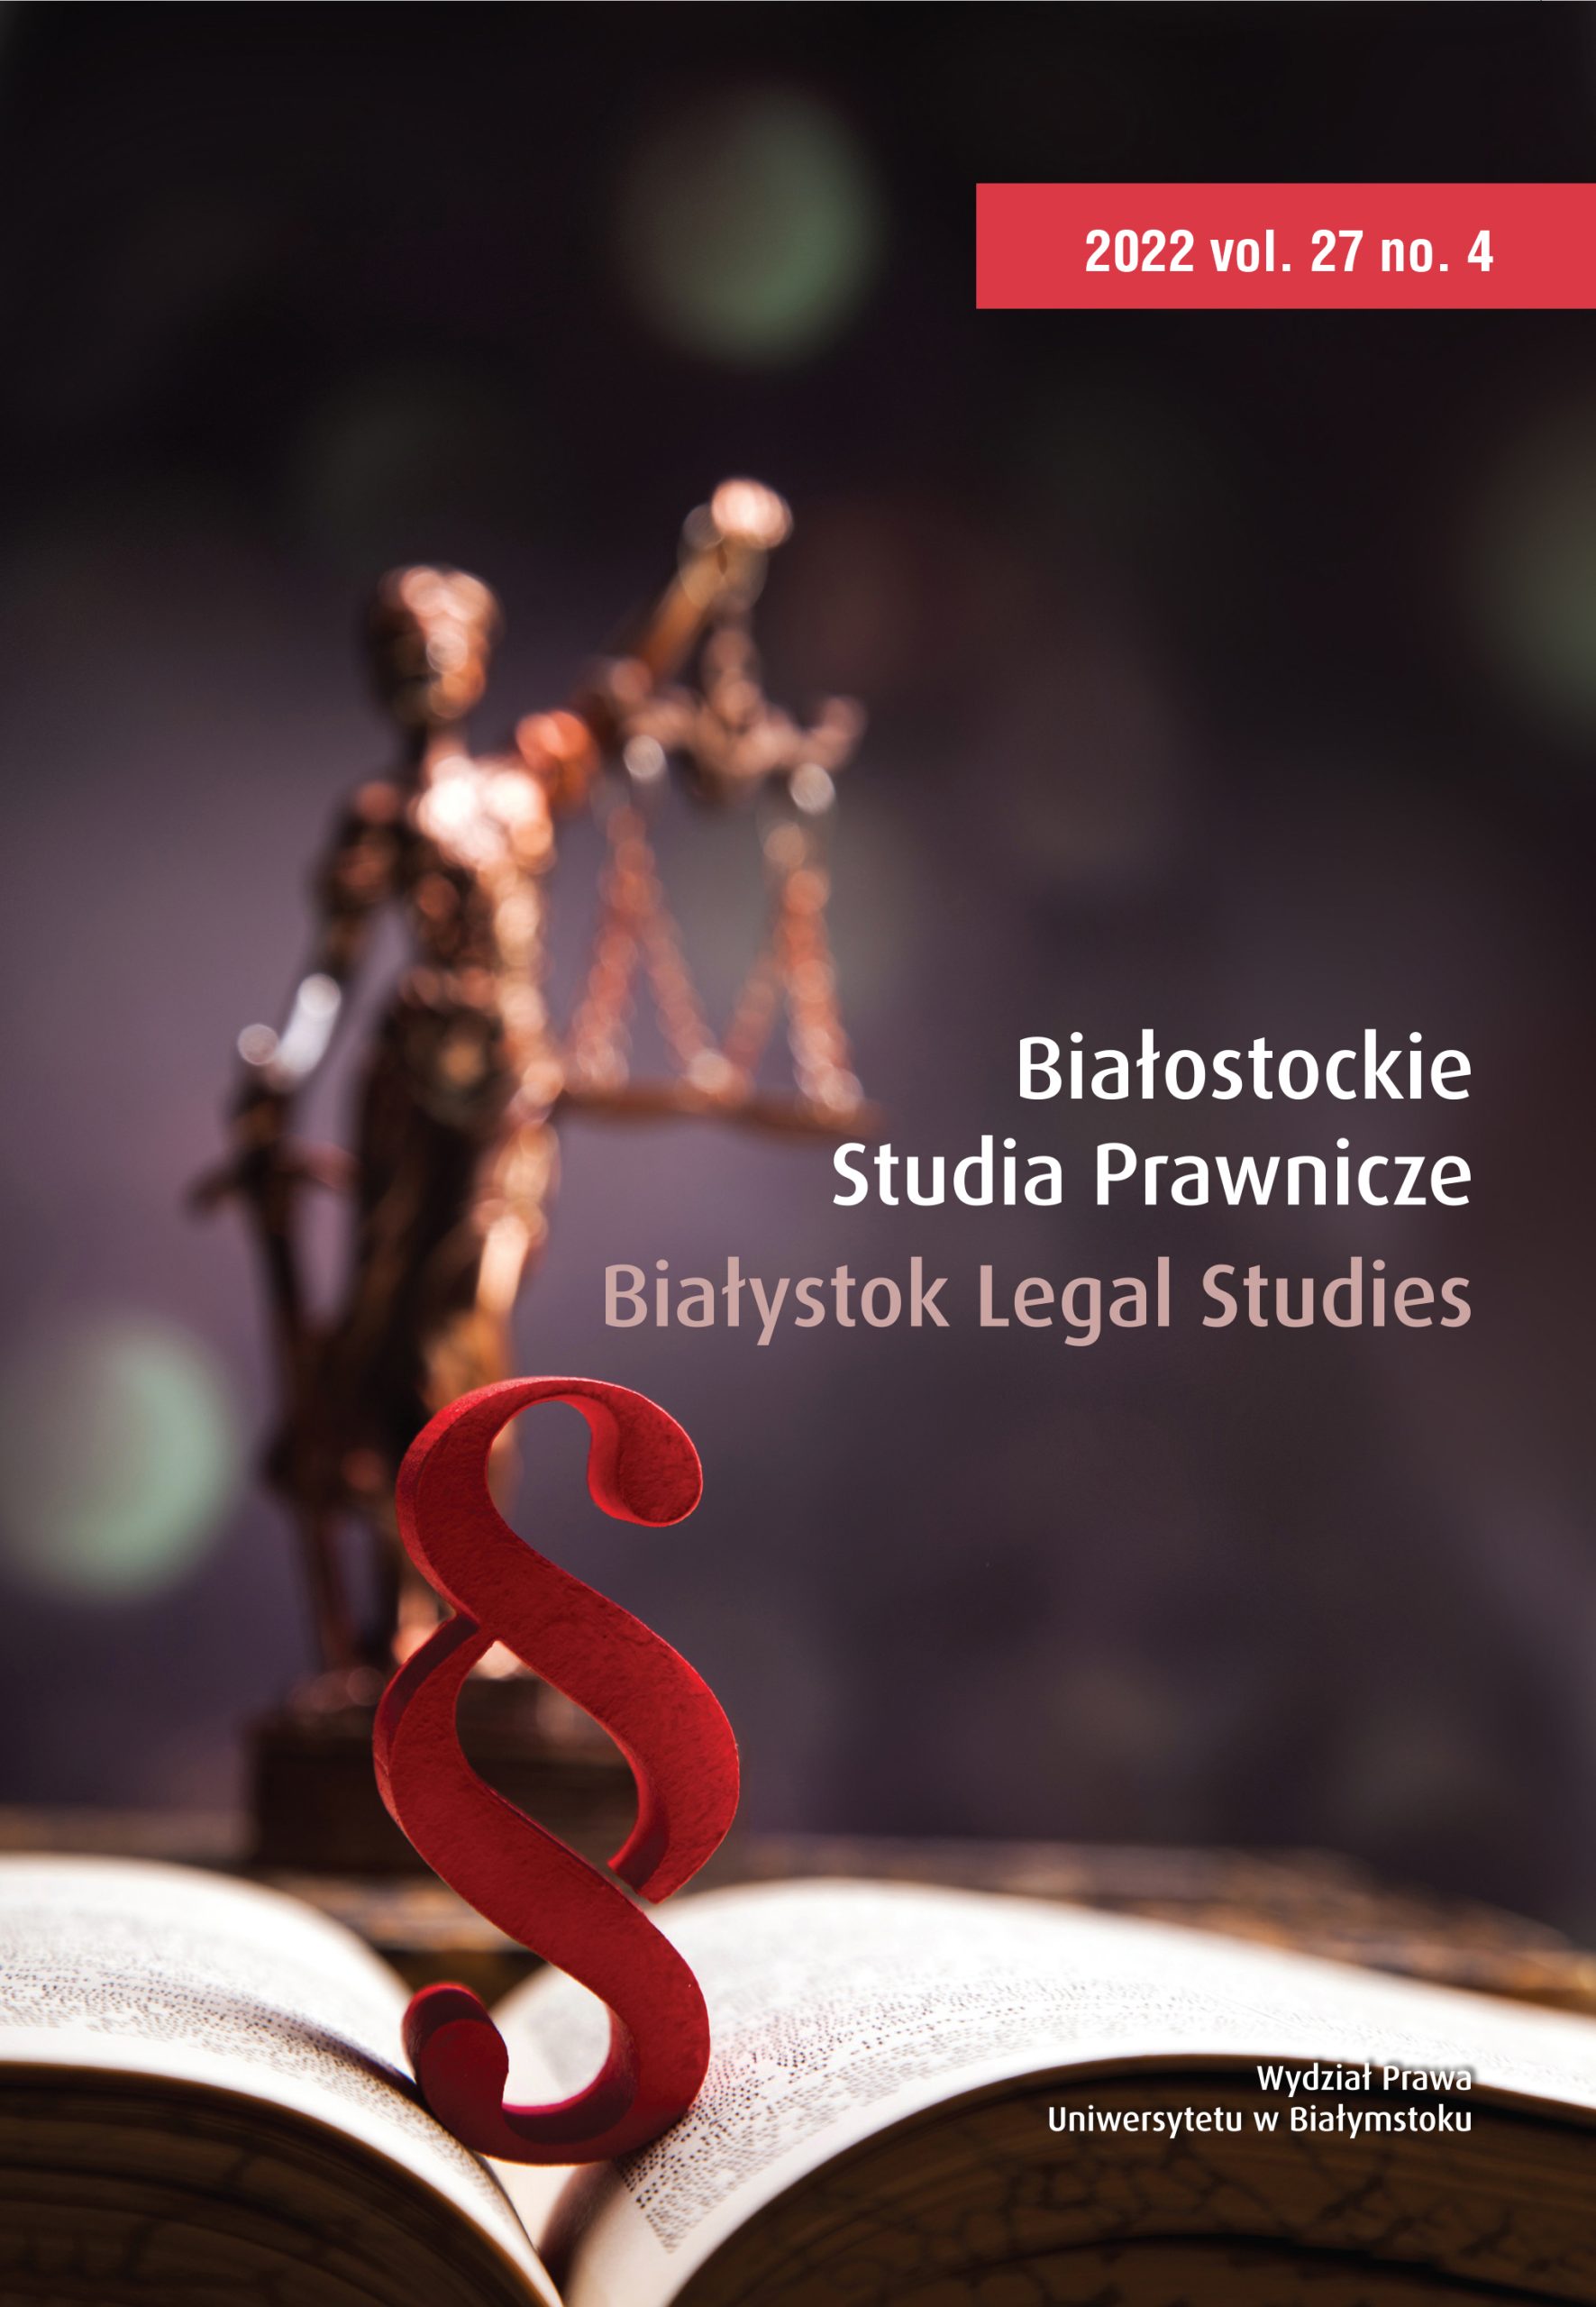 ‘Firm’ [Firma] in the Meaning of Polish Legal Language: The Business Name under which the Entrepreneur Operates in Legal and Economic Transactions, or an Entrepreneur [Przedsiębiorca]? Selected Comments on the (Un) Reasonableness of the Use of the Wo Cover Image